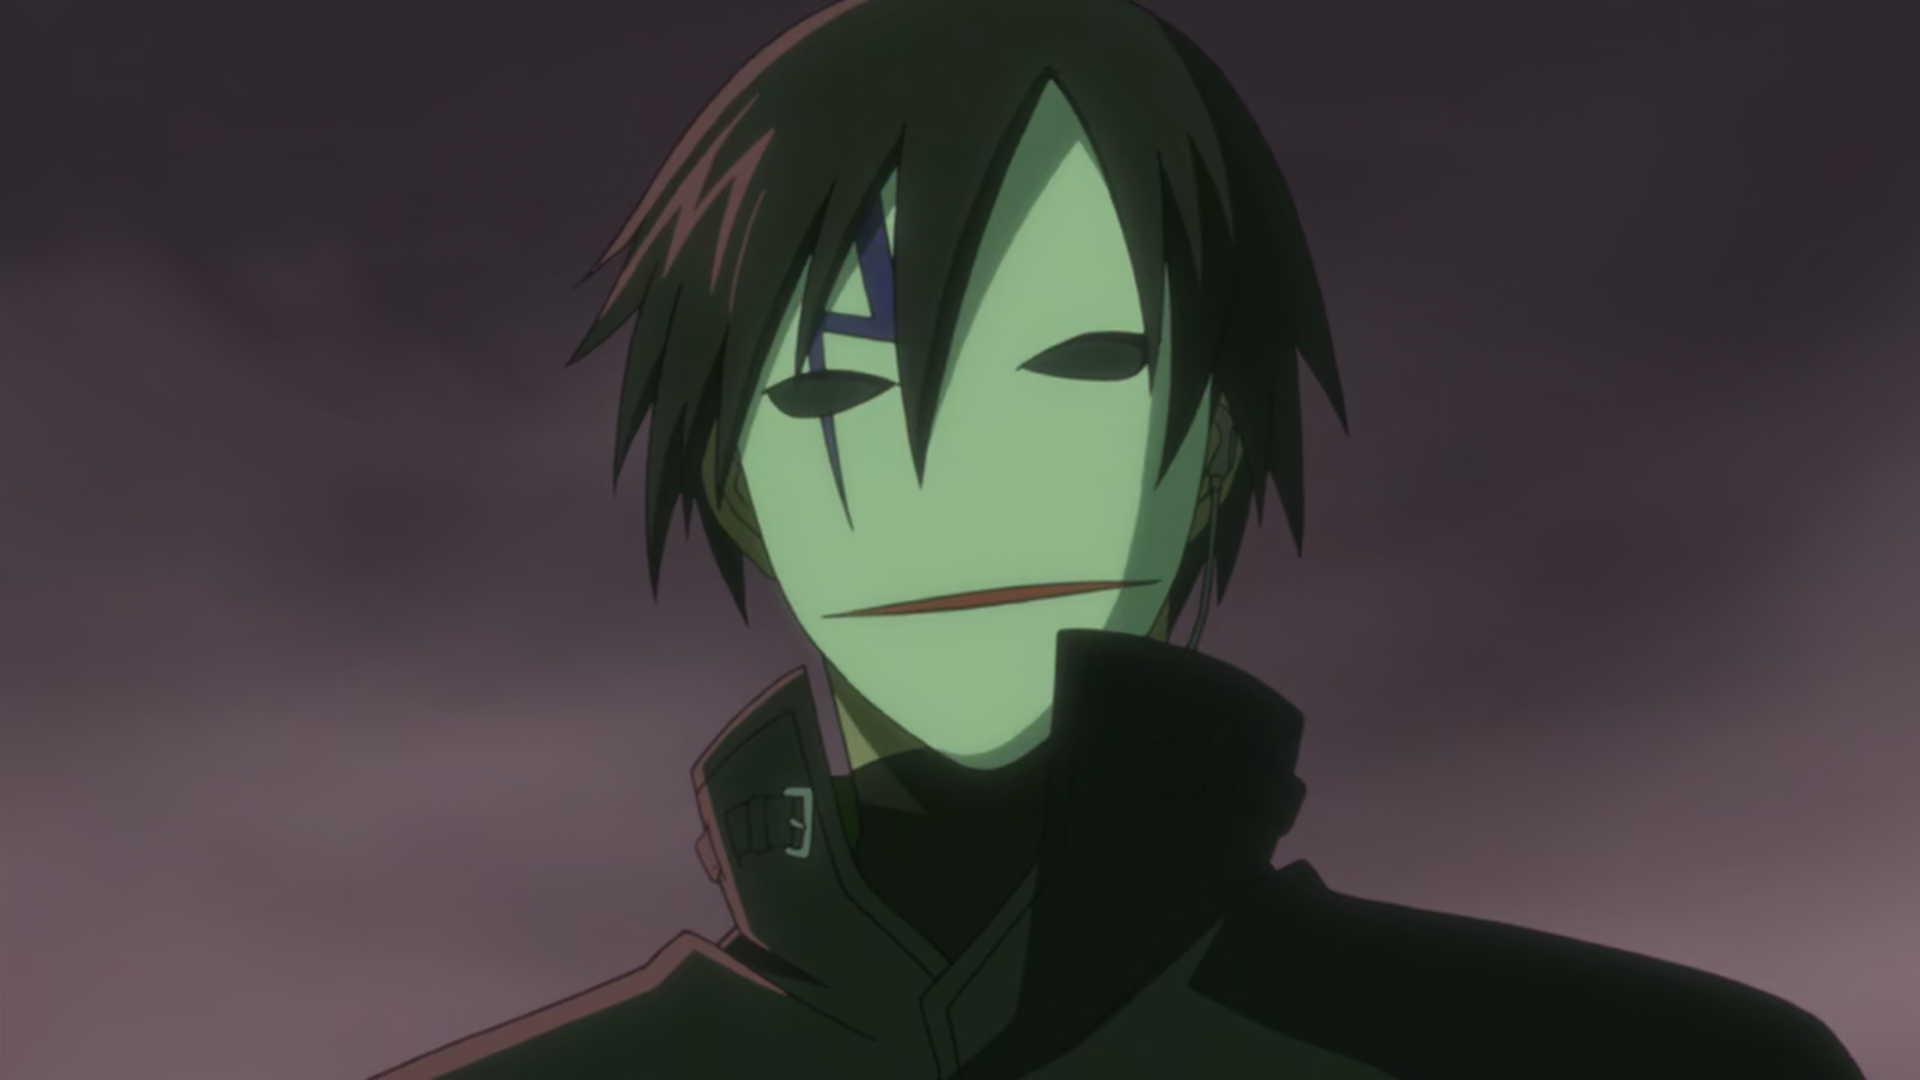 Crunchyroll - FEATURE: Unmasked! Rating the Best and Worst Masks in Anime